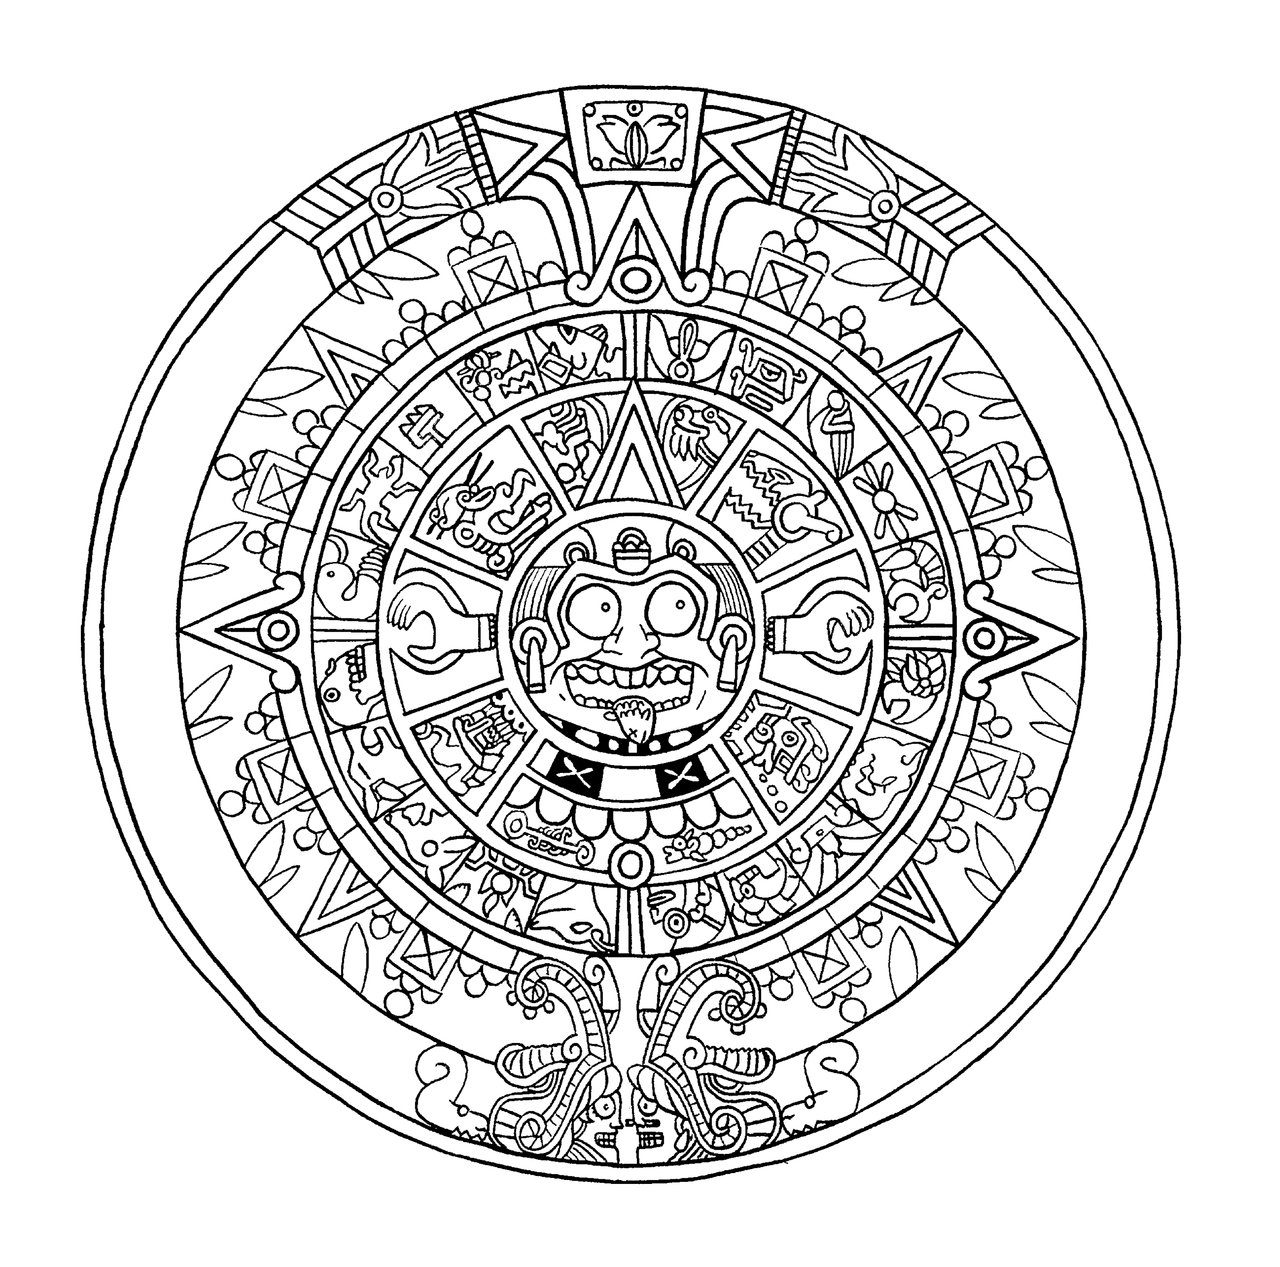 Mayan+Calendar | How To Draw : Mayan Calendar (Page 2) | Coloring intended for Versions Of The Mayan Calendar